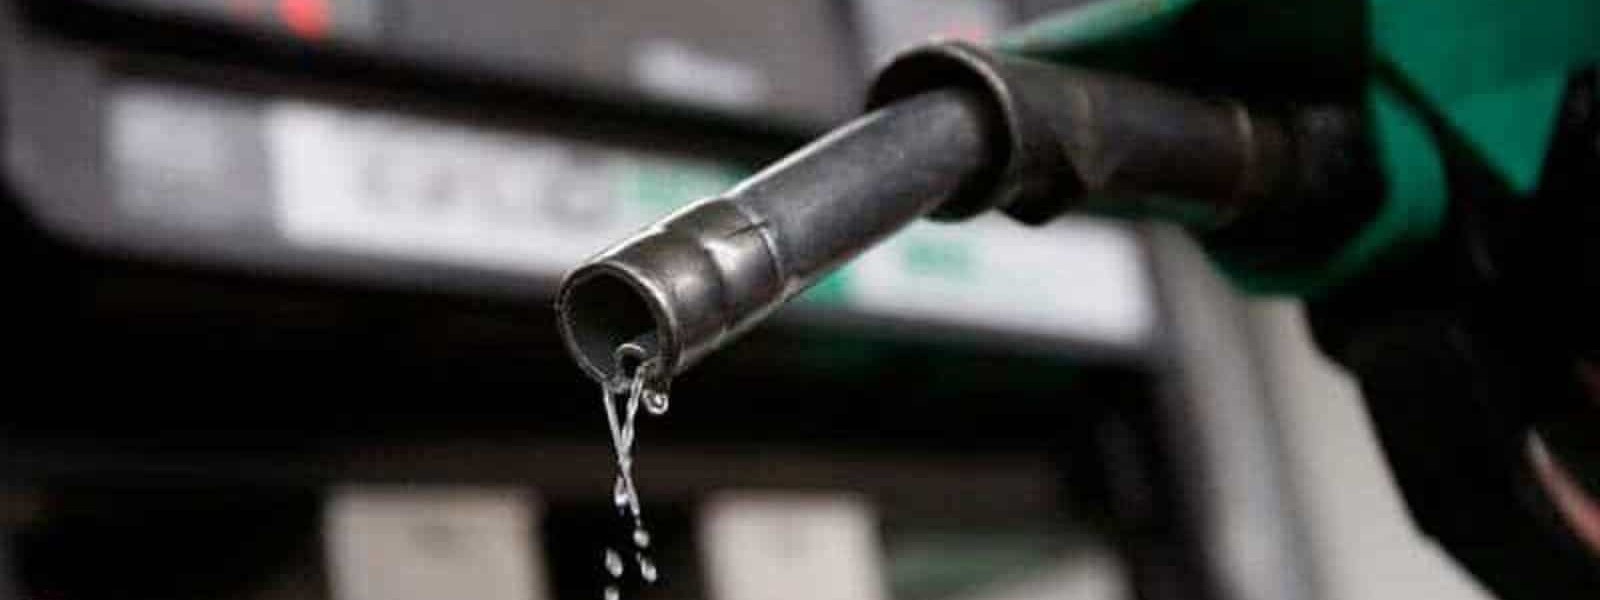 Millions of Fuel Sales Records Deleted in SL